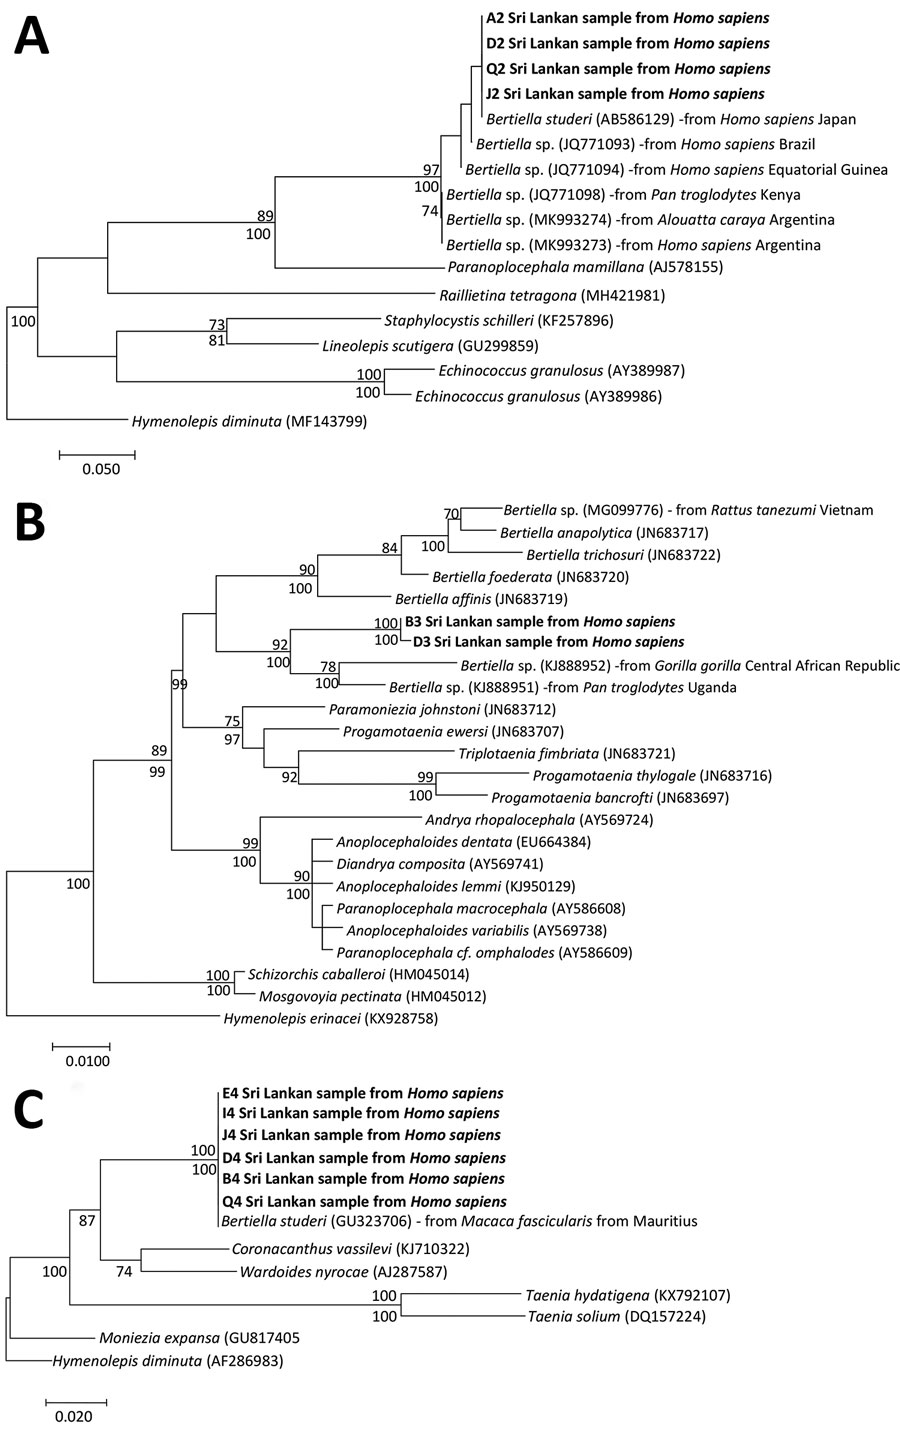 Molecular phylogeny of the nuclear ribosomal markers in study of Bertiella tapeworms in children in Sri Lanka. Bold text indicates Bertiella studeri samples from Sri Lanka. A) Maximum-likelihood tree containing 17 taxa, constructed by the analysis of partial ITS2 sequence alignment. B) Maximum likelihood tree containing 24 taxa, constructed by the analysis of partial 28S sequence alignment. C) Maximum-likelihood tree containing 13 taxa, constructed by the analysis of partial 18S sequence alignme